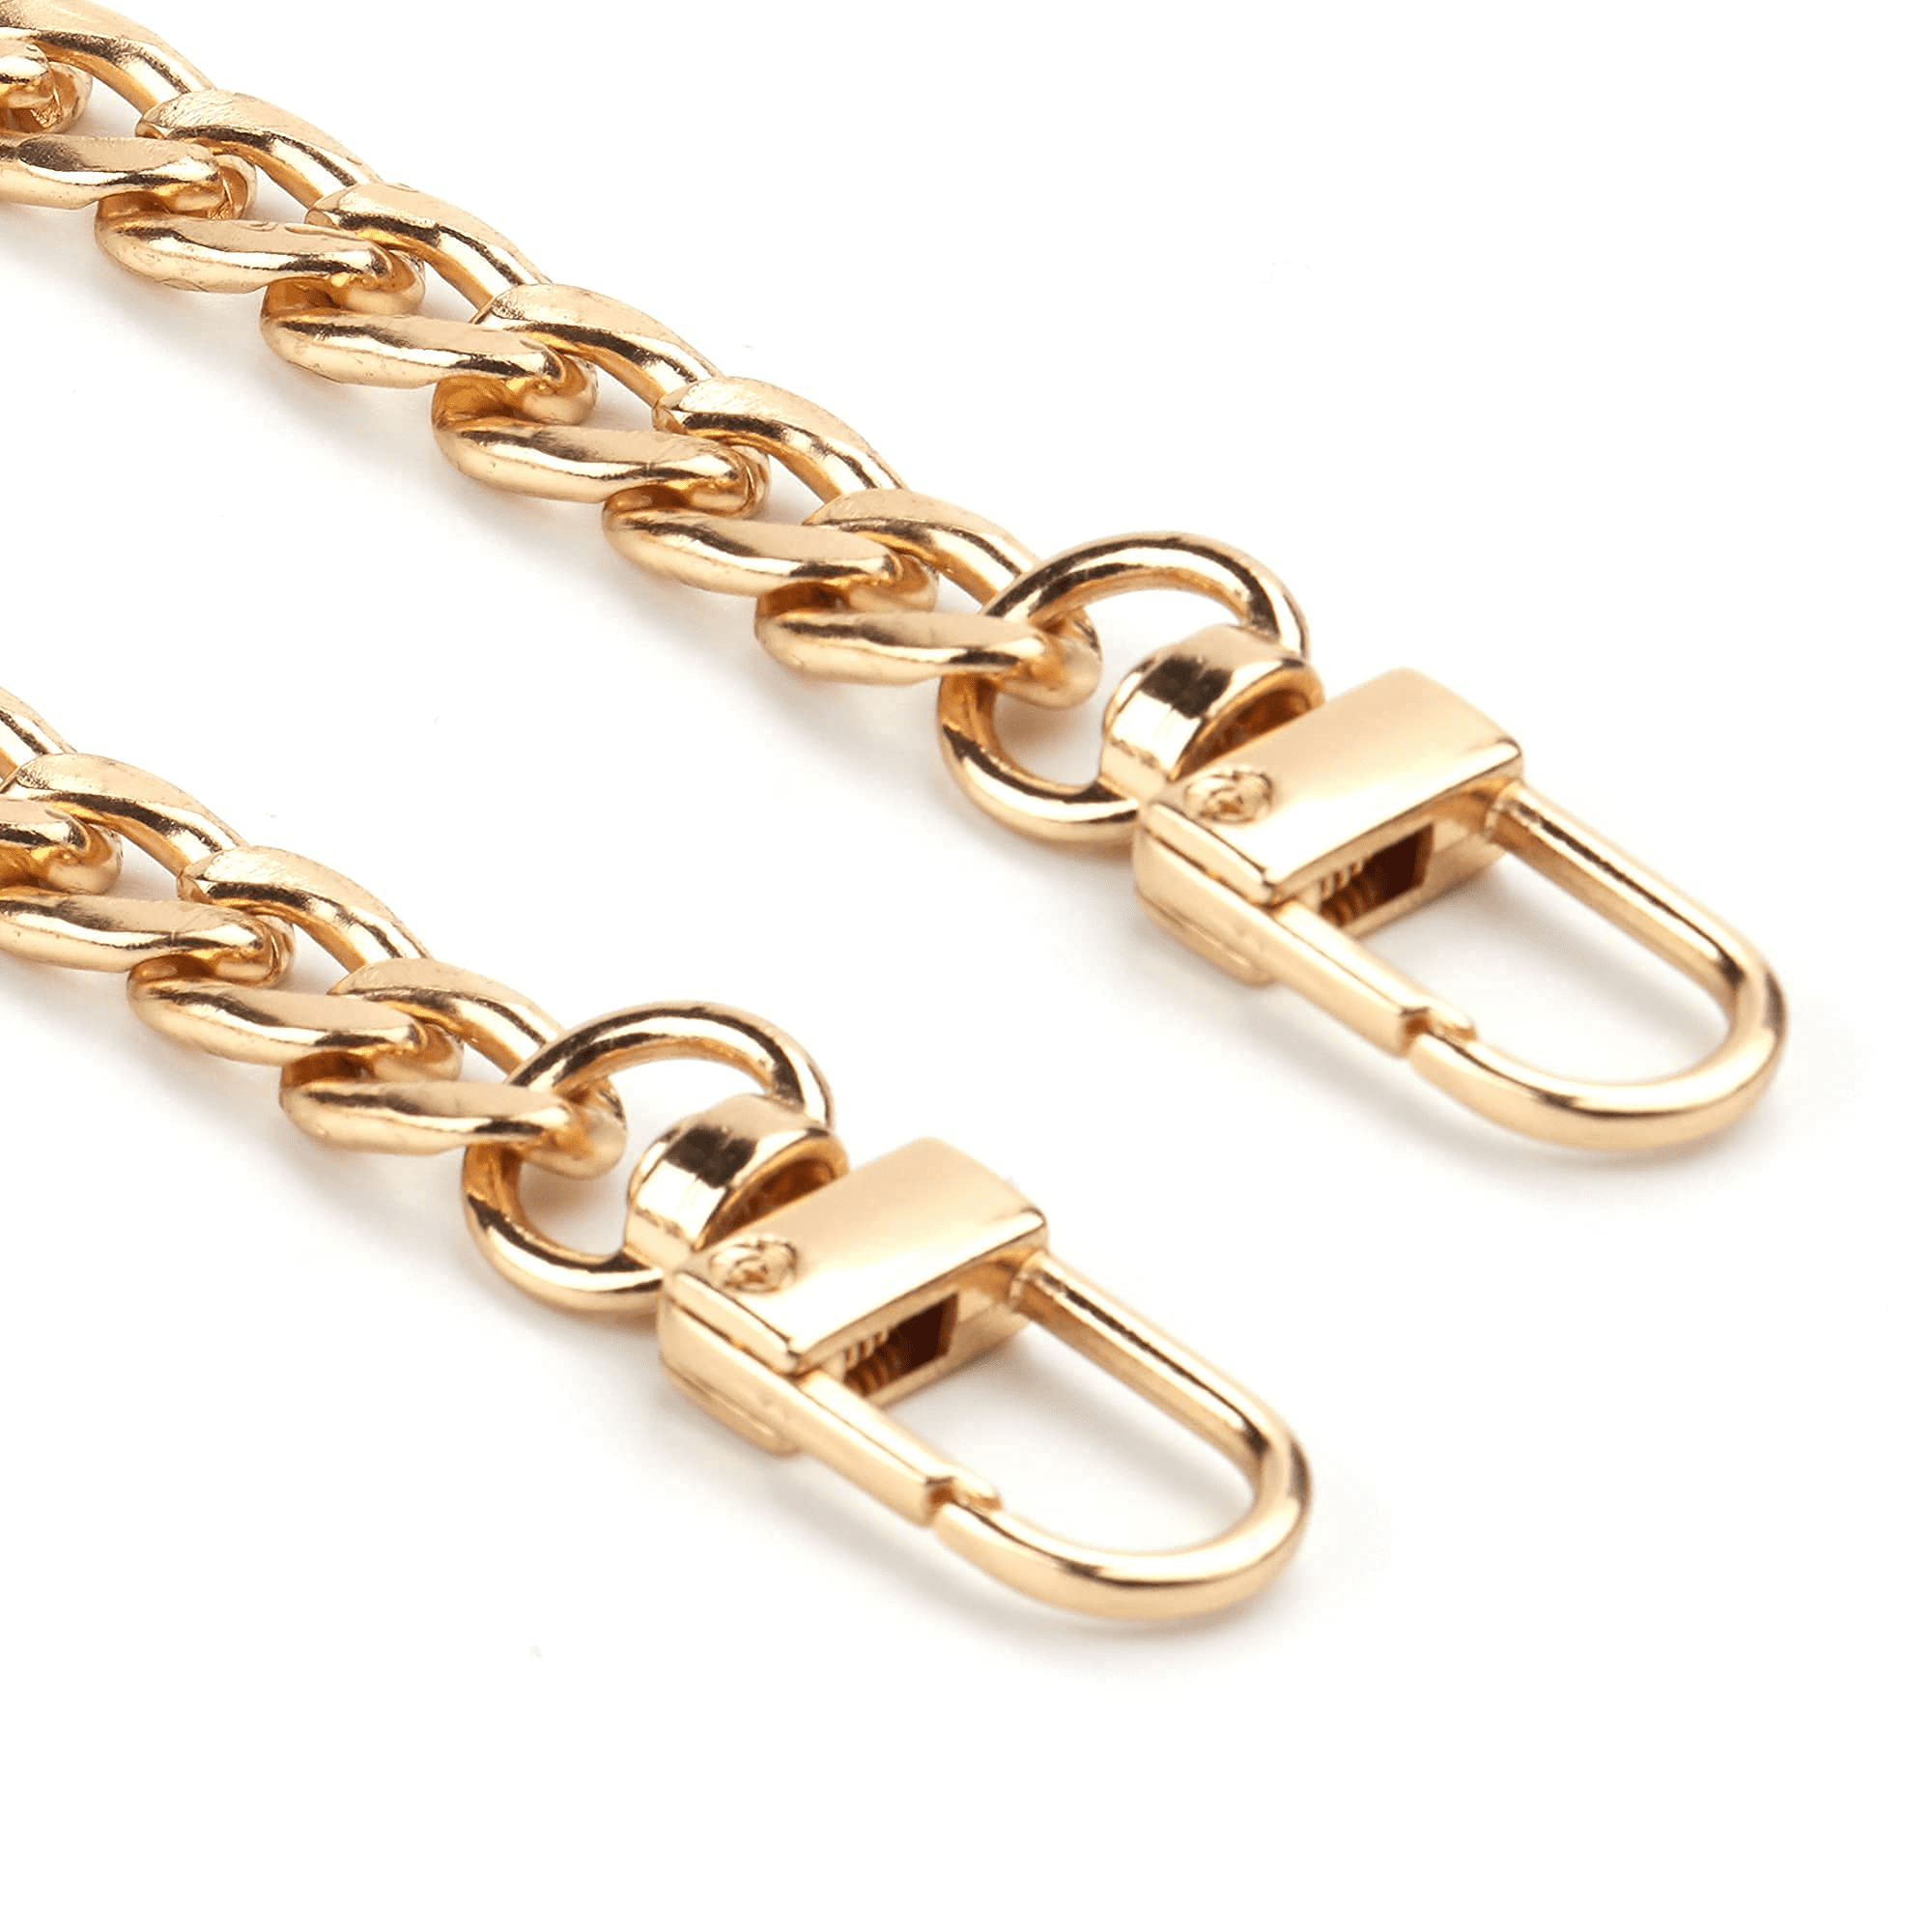 Wokape 4 Sizes Gold Purse Chain Strap, Replacement Flat Chain Strap with  Buckles, Perfect for DIY Metal Shoulder Purse Chain Replacement - 7.5  15.7